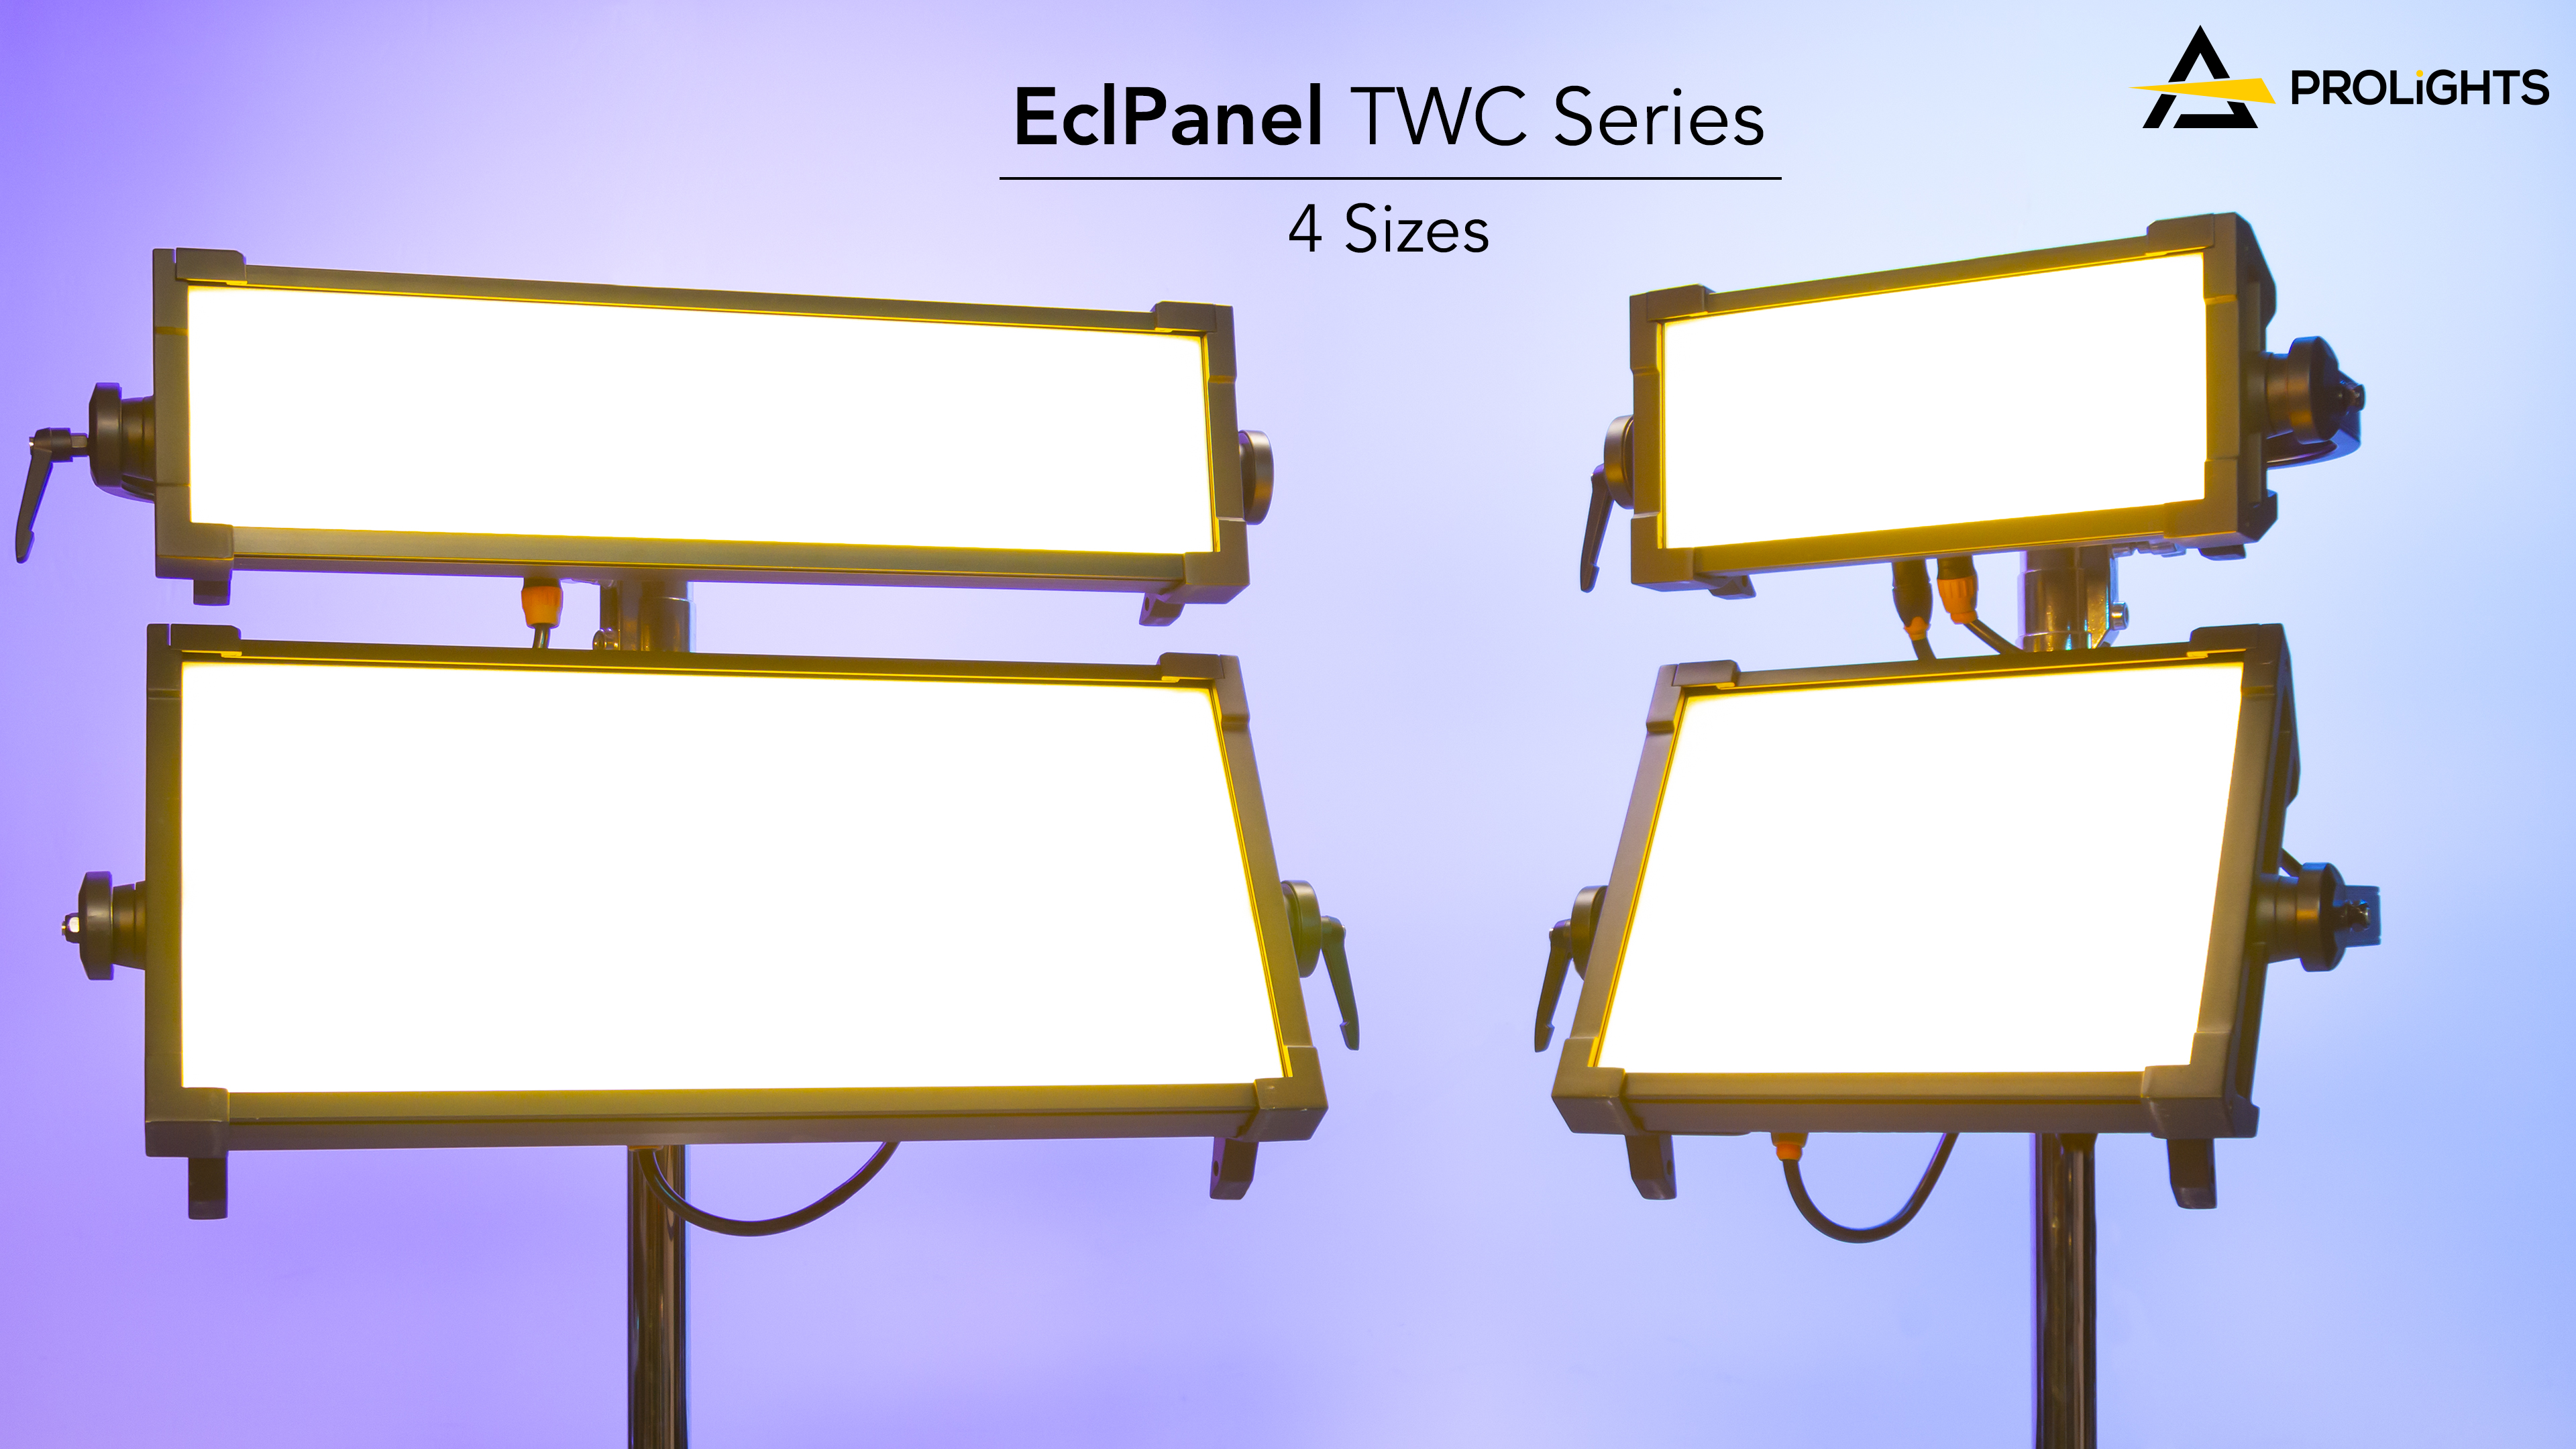 PROLIGHTS adds two new soft lights to the EclPanel range